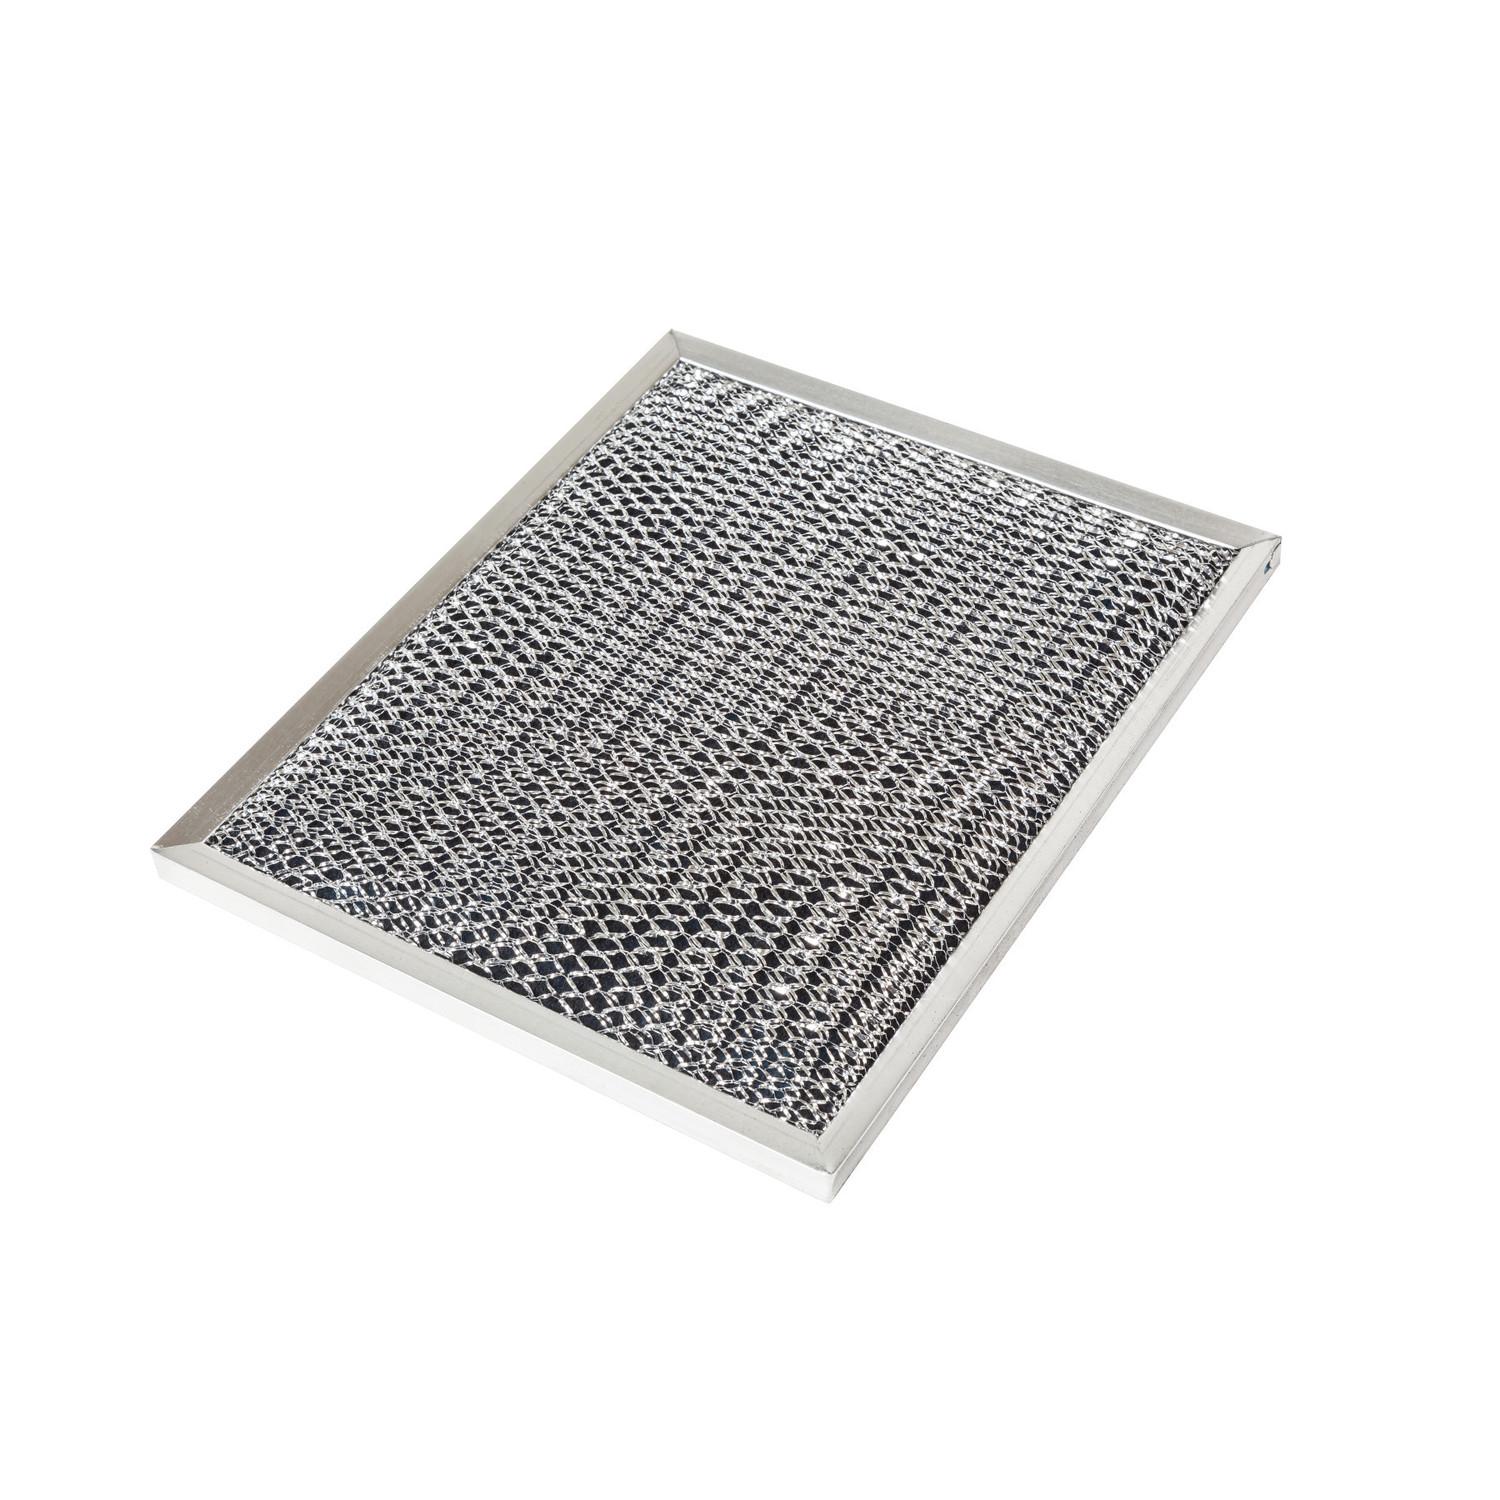 Broan Non-Duct Charcoal Replacement Filter for use with Select Broan® Range Hoods 8-3/4" x 10-1/2" x 3/8"